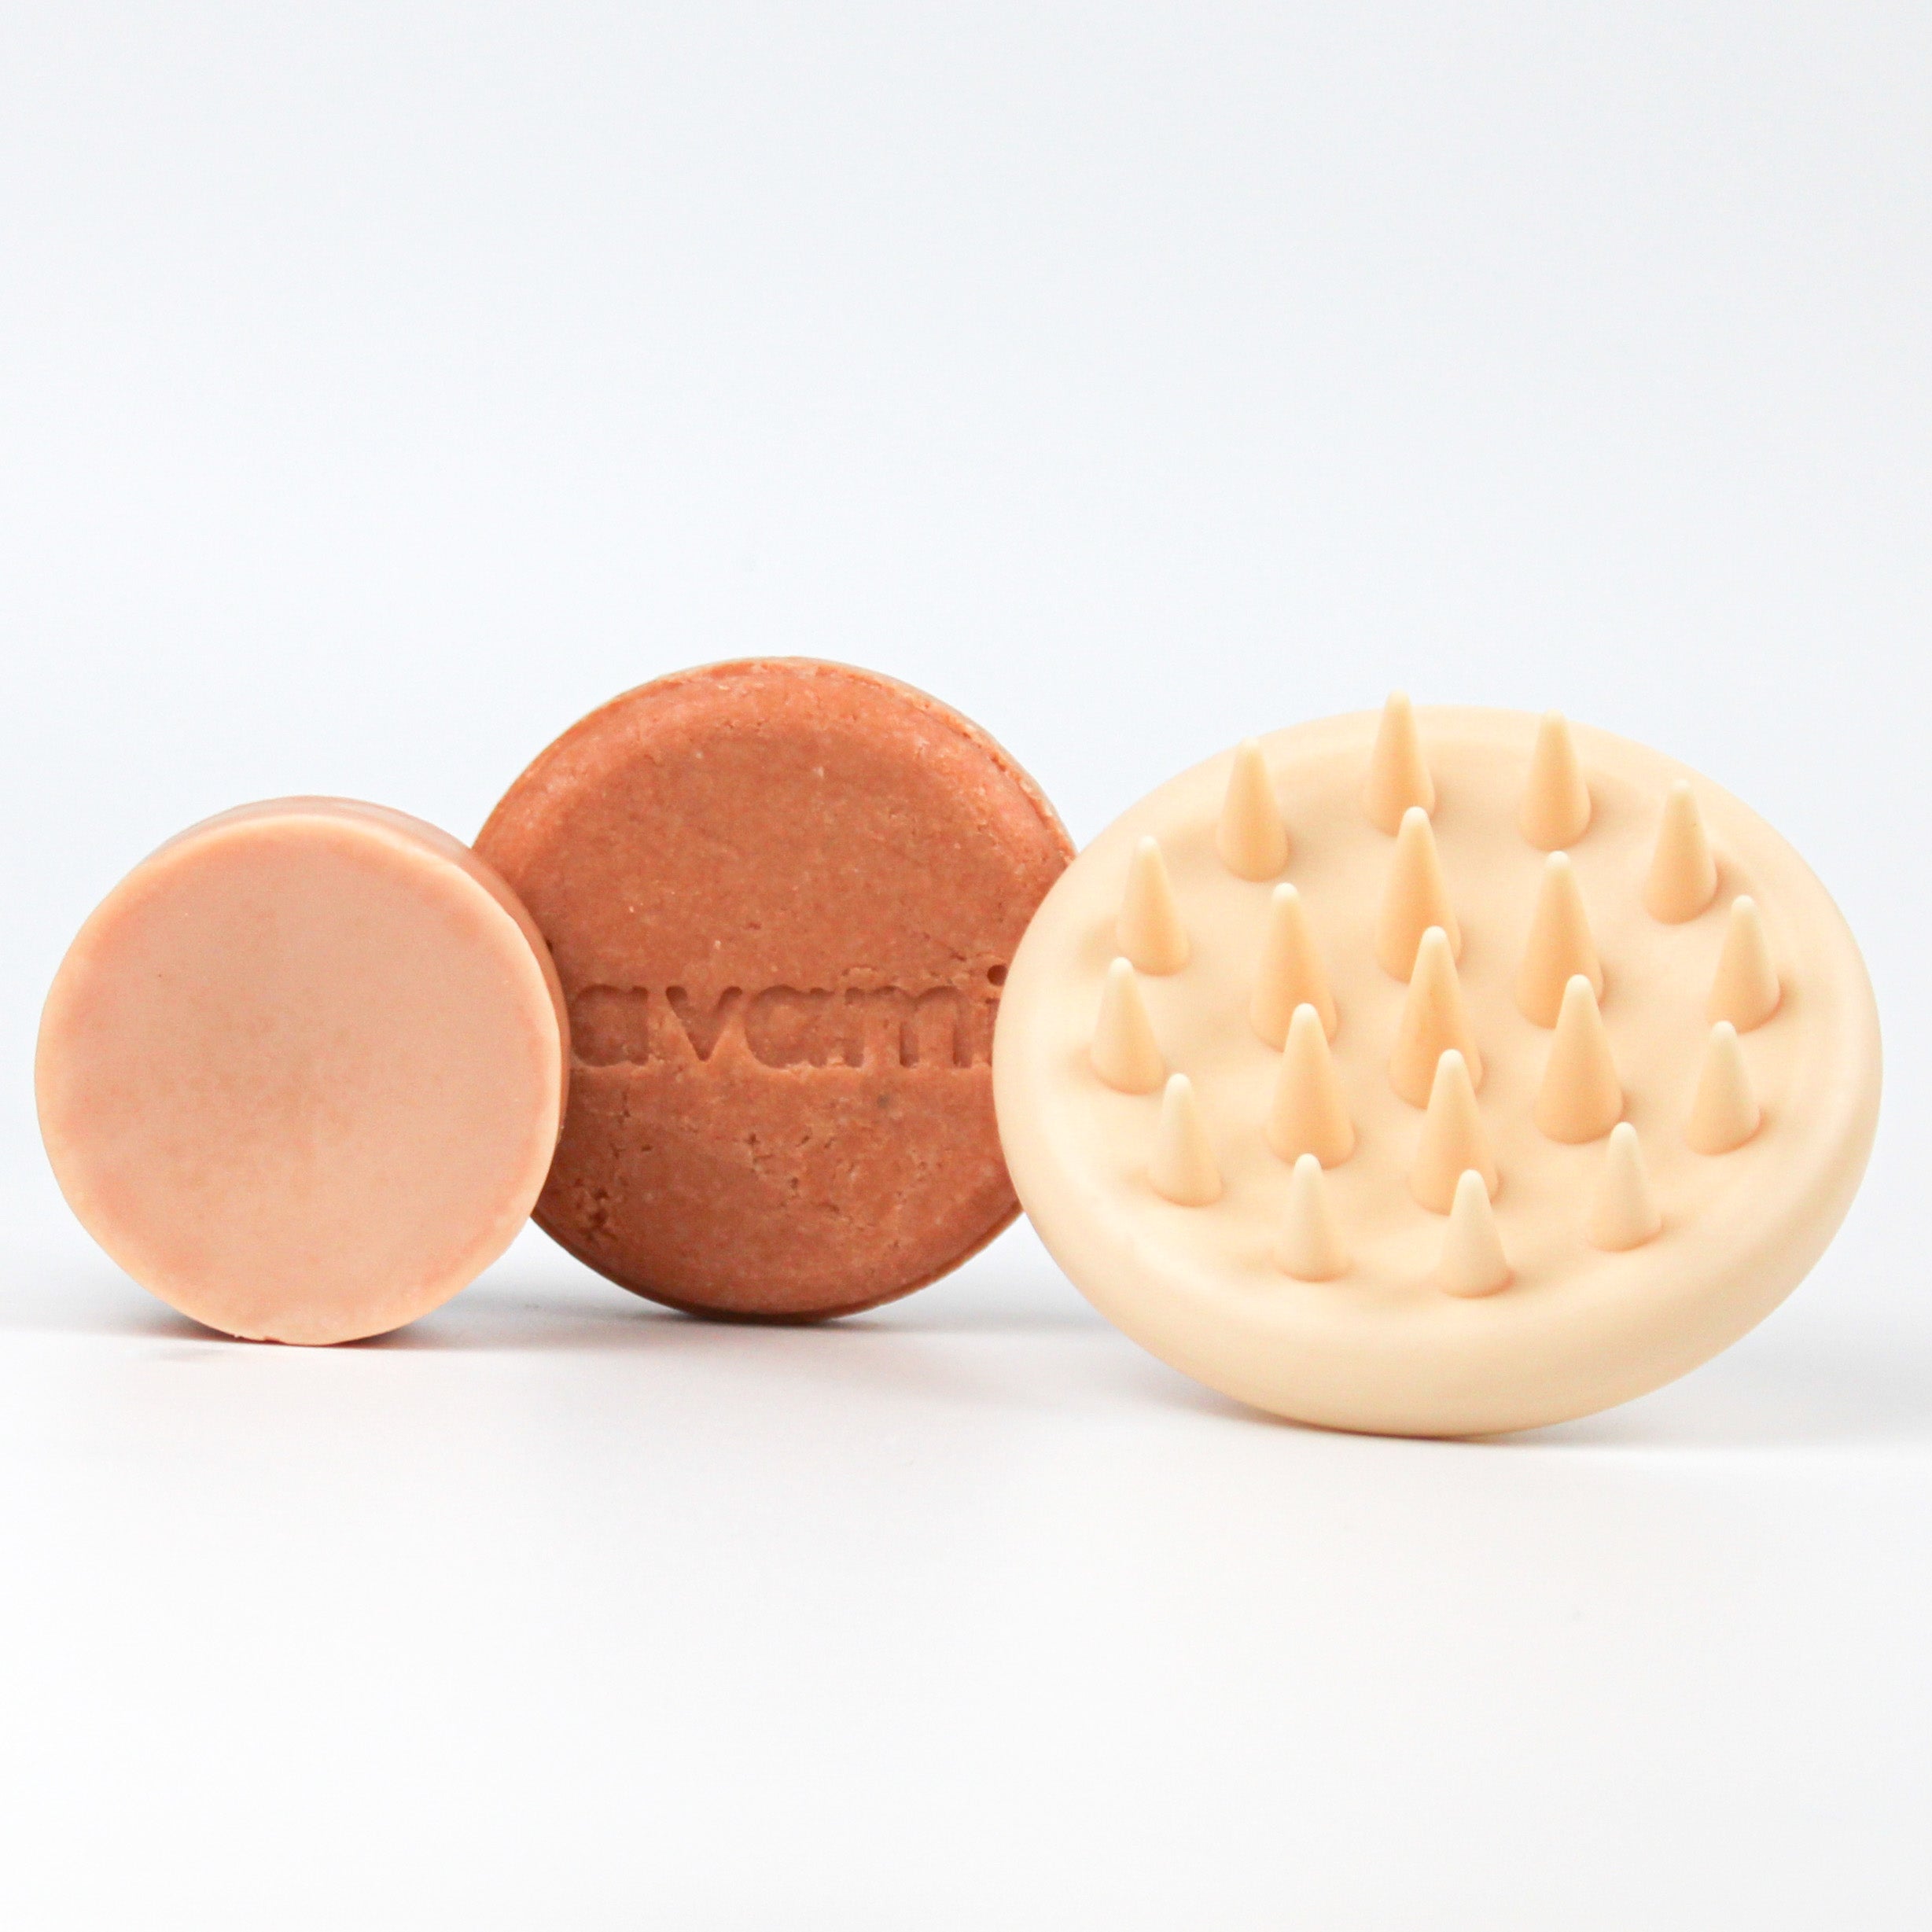 Lavami Shampoo and conditioner bar and scalp massager